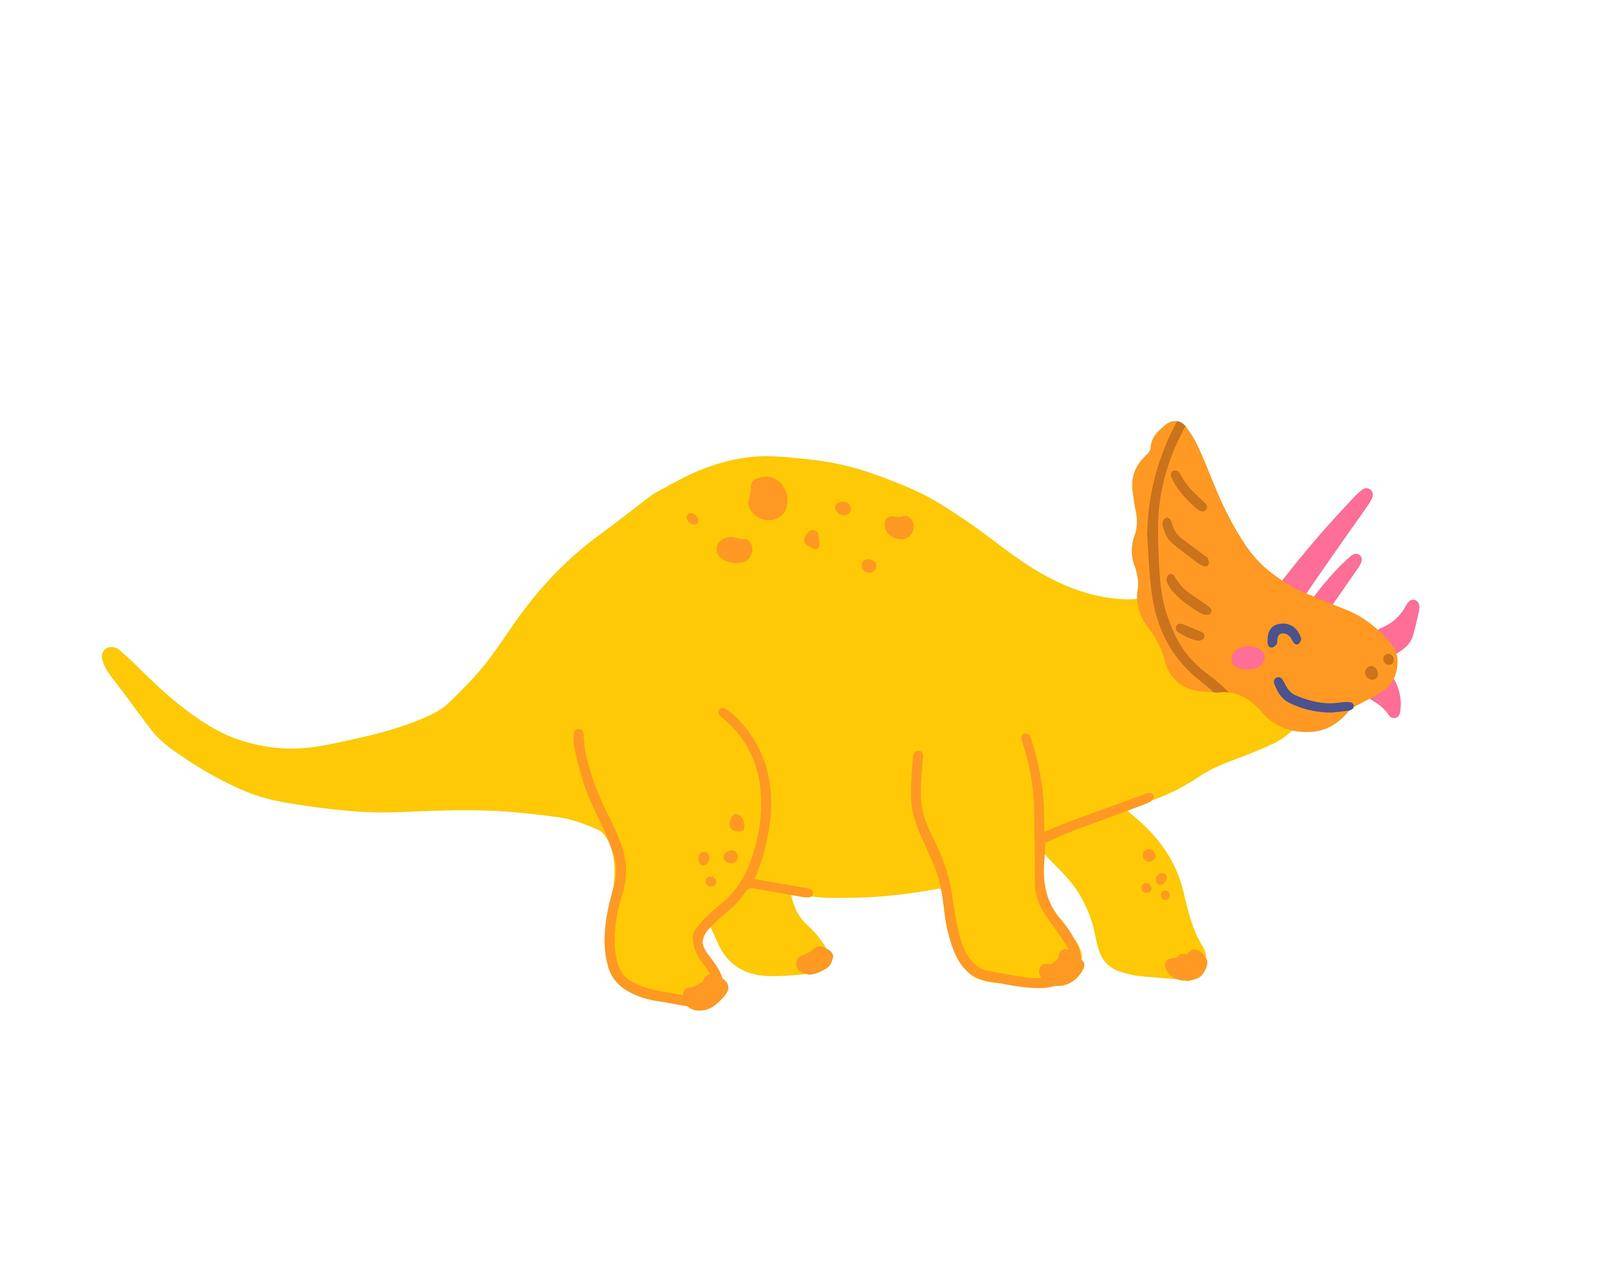 Cute herbivorous dinosaur Triceratops, vector flat illustration in hand drawn style on white background by vetriciya_art